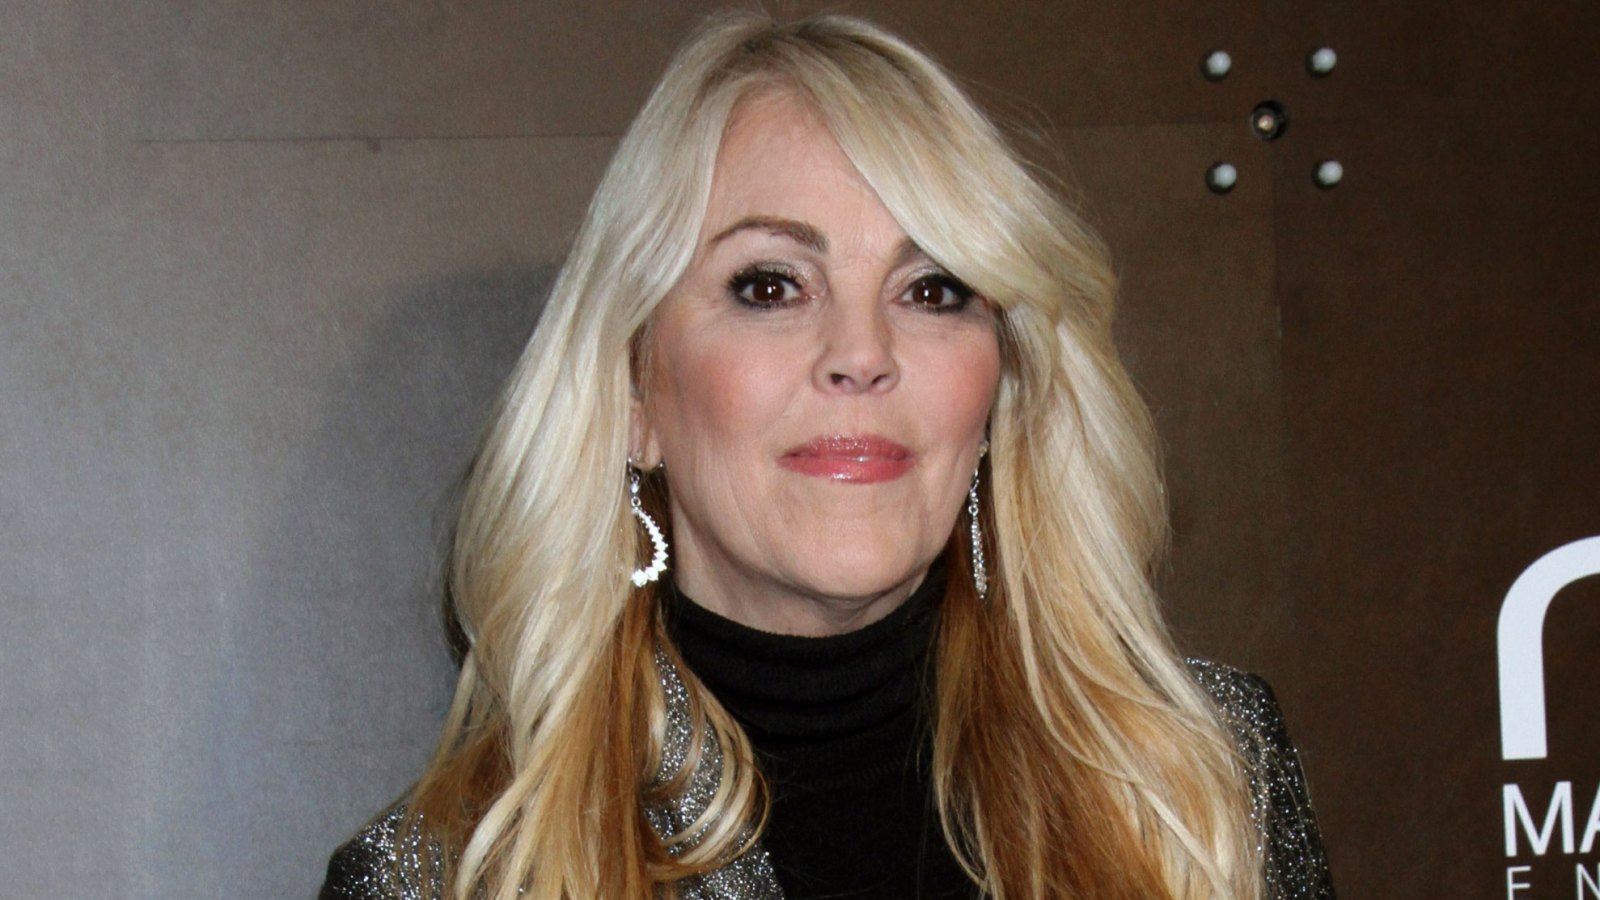 Dina Lohan Arrested for Driving While Intoxicated, Leaving the Scene of a Crash